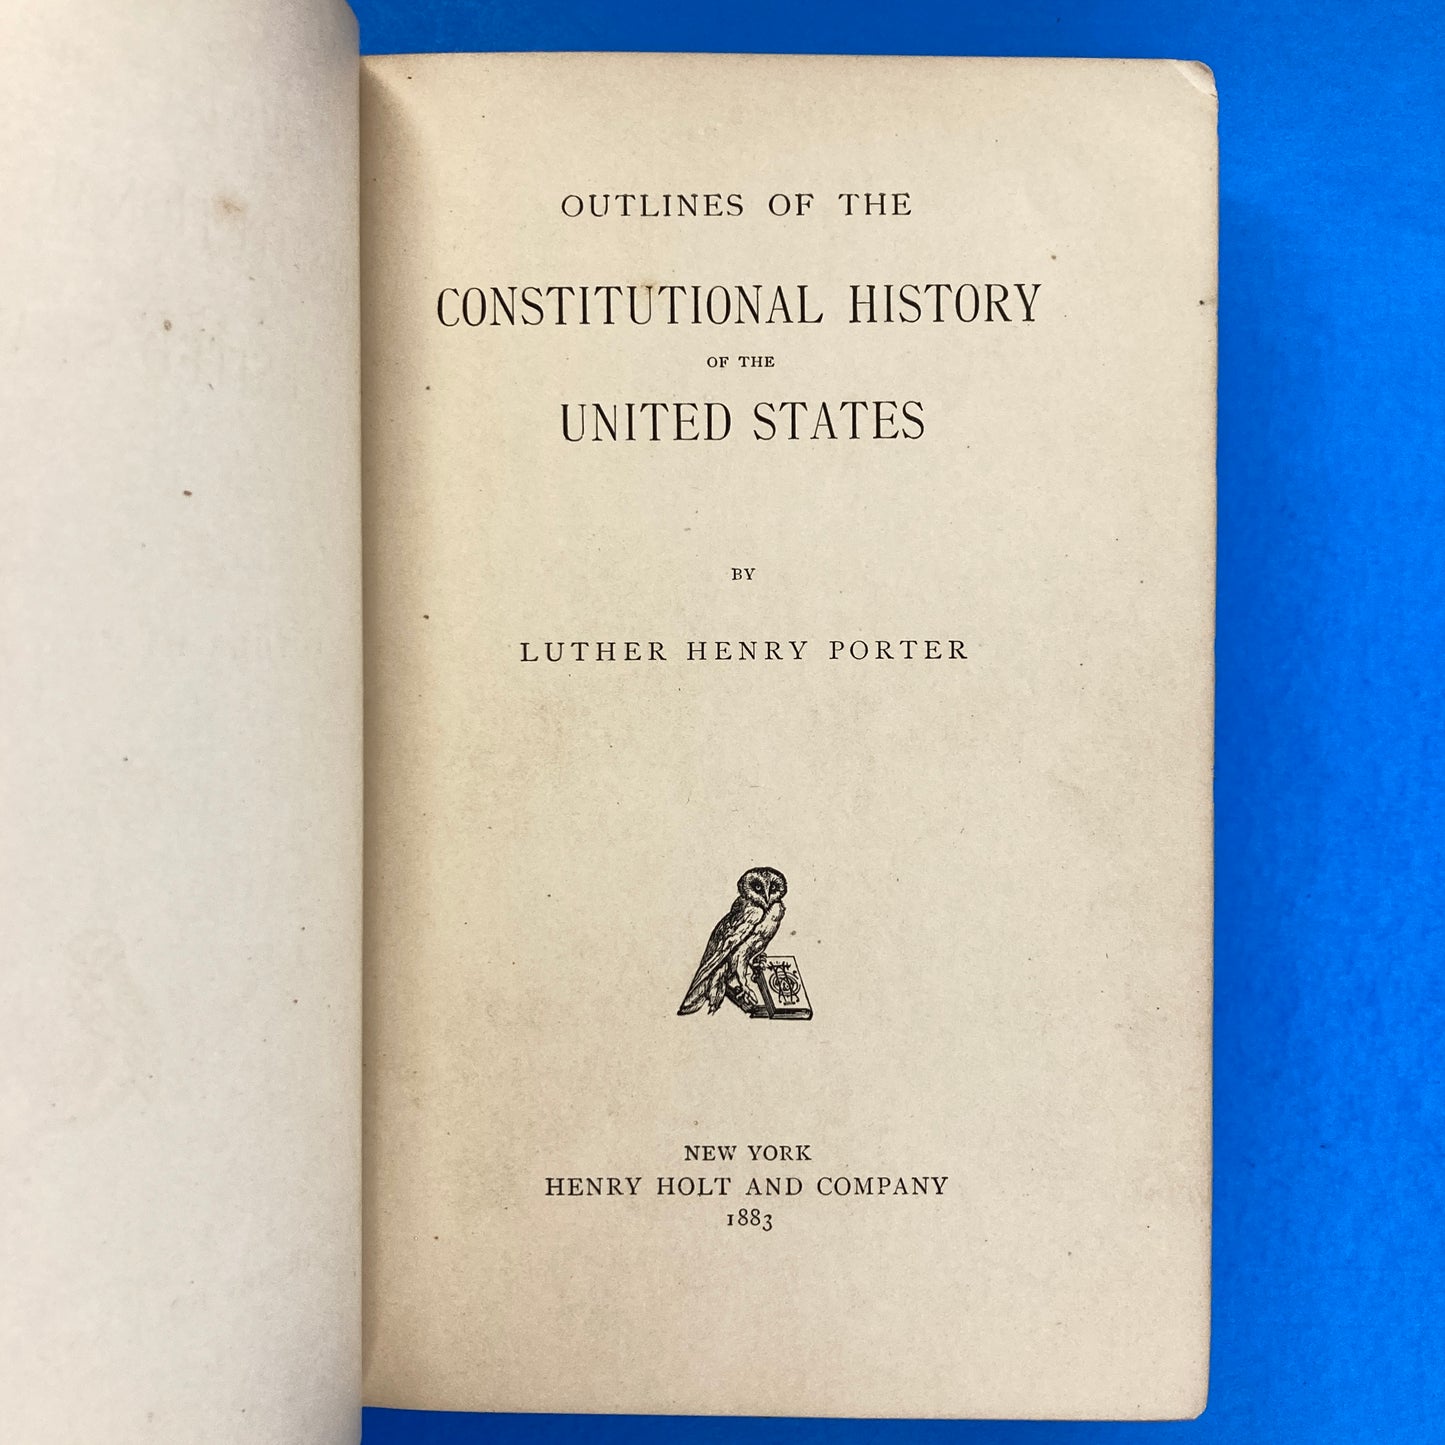 Outlines of the Constitutional History of the United States